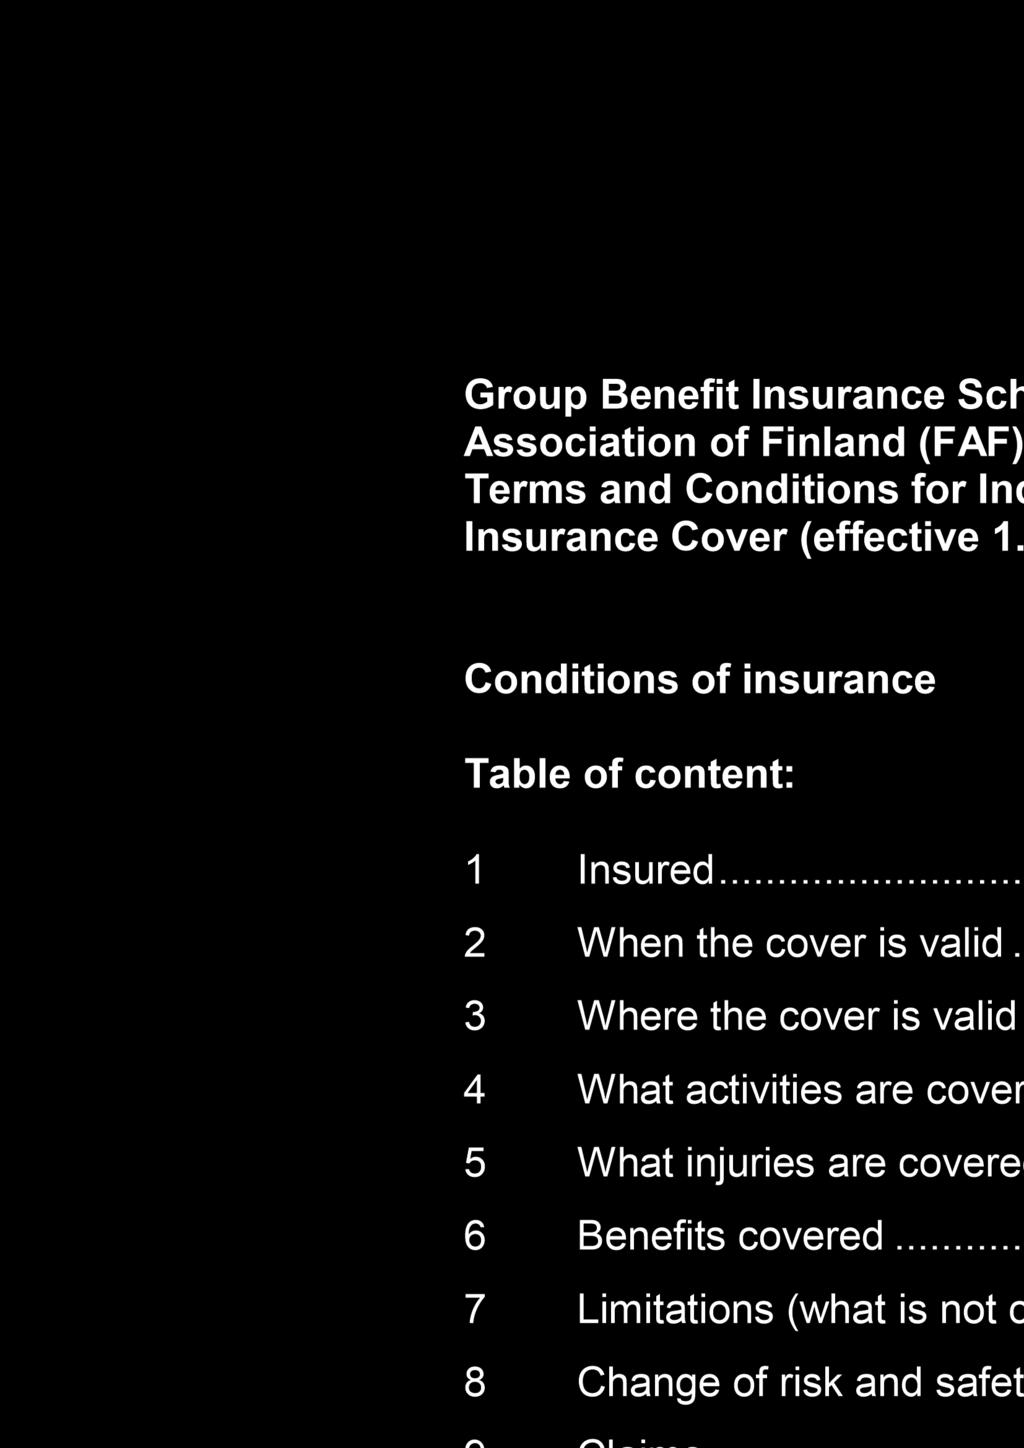 Group Benefit Insurance Scheme - Football Association of Finland (FAF) Terms and Conditions for Individual Licence Insurance Cover (effective 1.12.